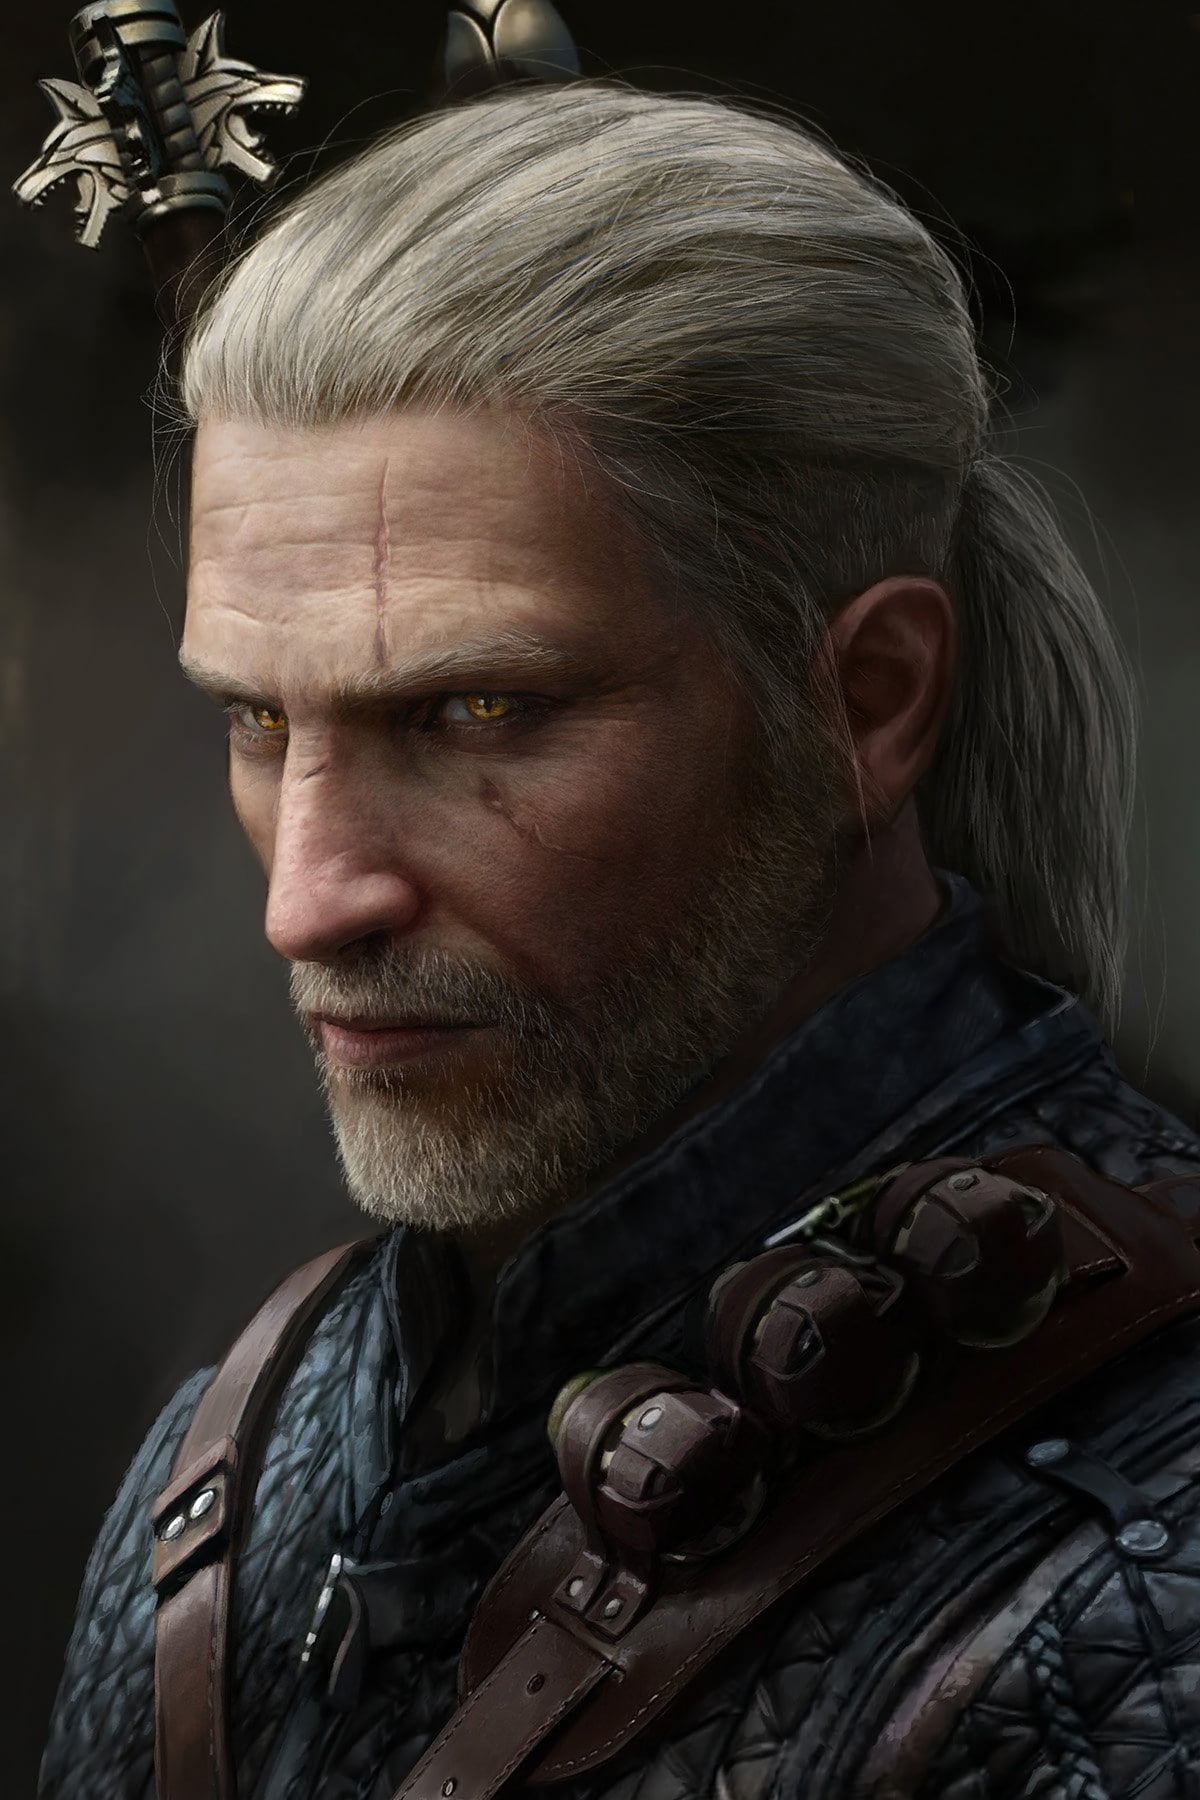 drawing, The Witcher, Geralt of Rivia, men, warrior, silver hair